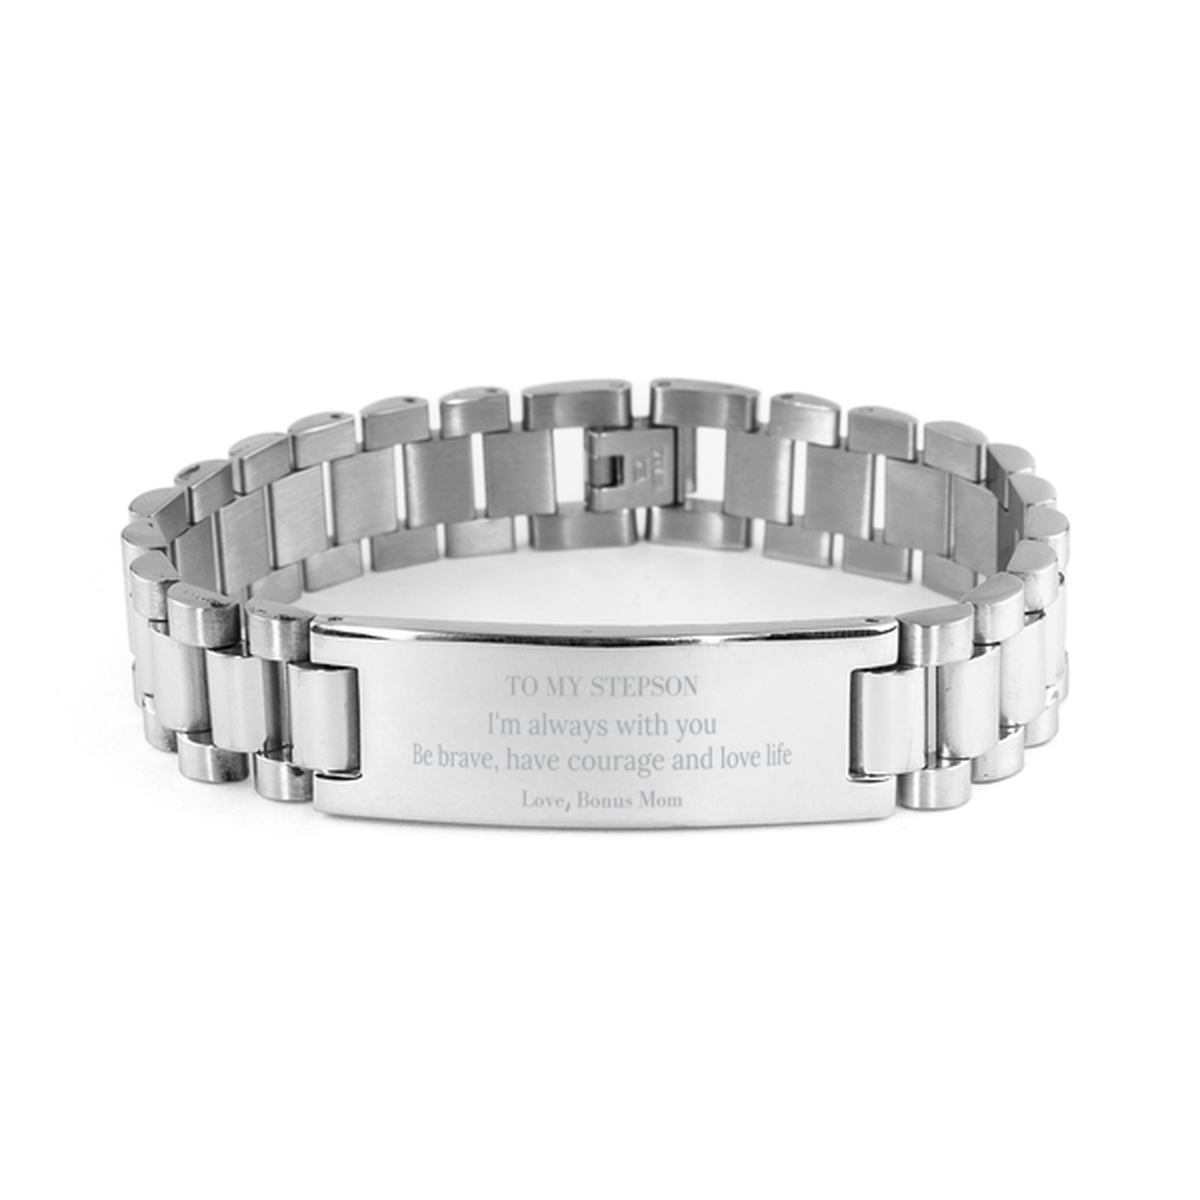 To My Stepson Gifts from Bonus Mom, Unique Ladder Stainless Steel Bracelet Inspirational Christmas Birthday Graduation Gifts for Stepson I'm always with you. Be brave, have courage and love life. Love, Bonus Mom